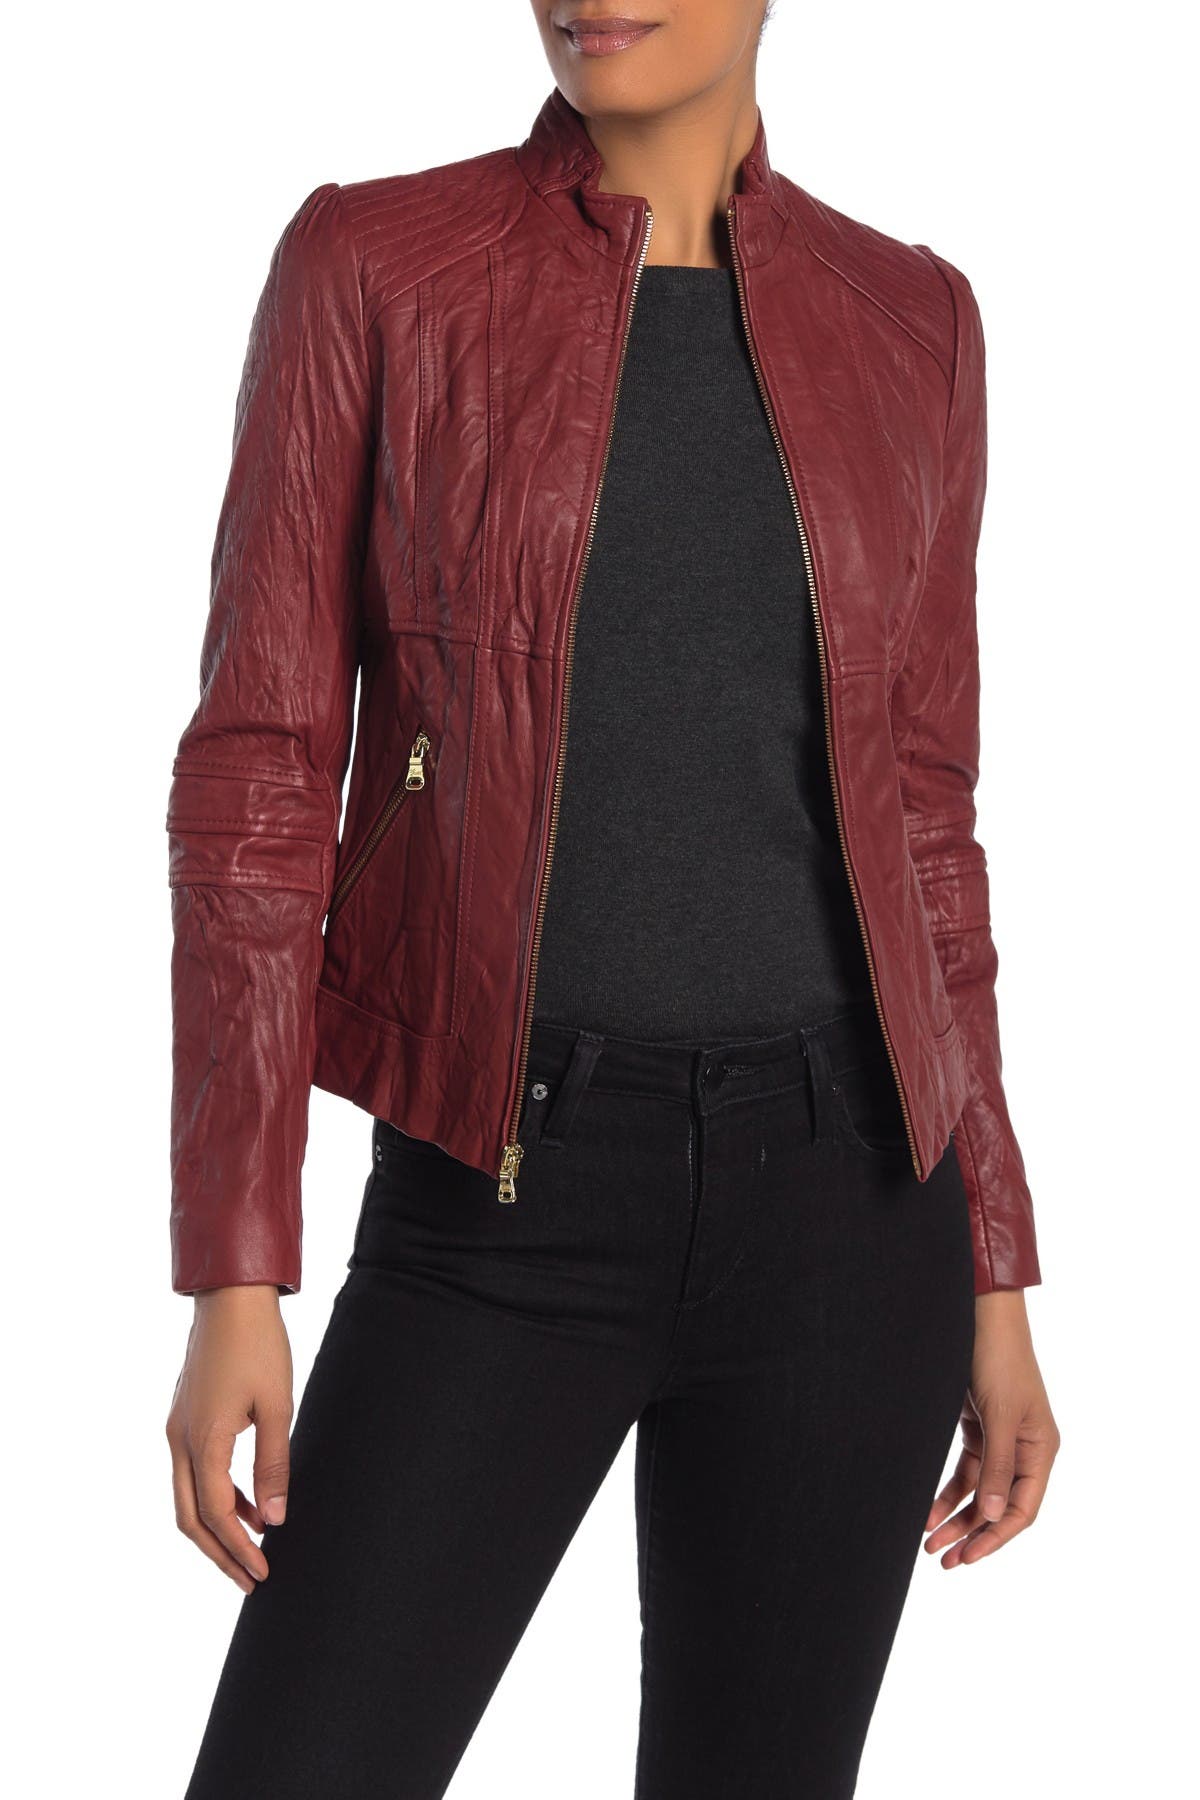 guess red leather jacket